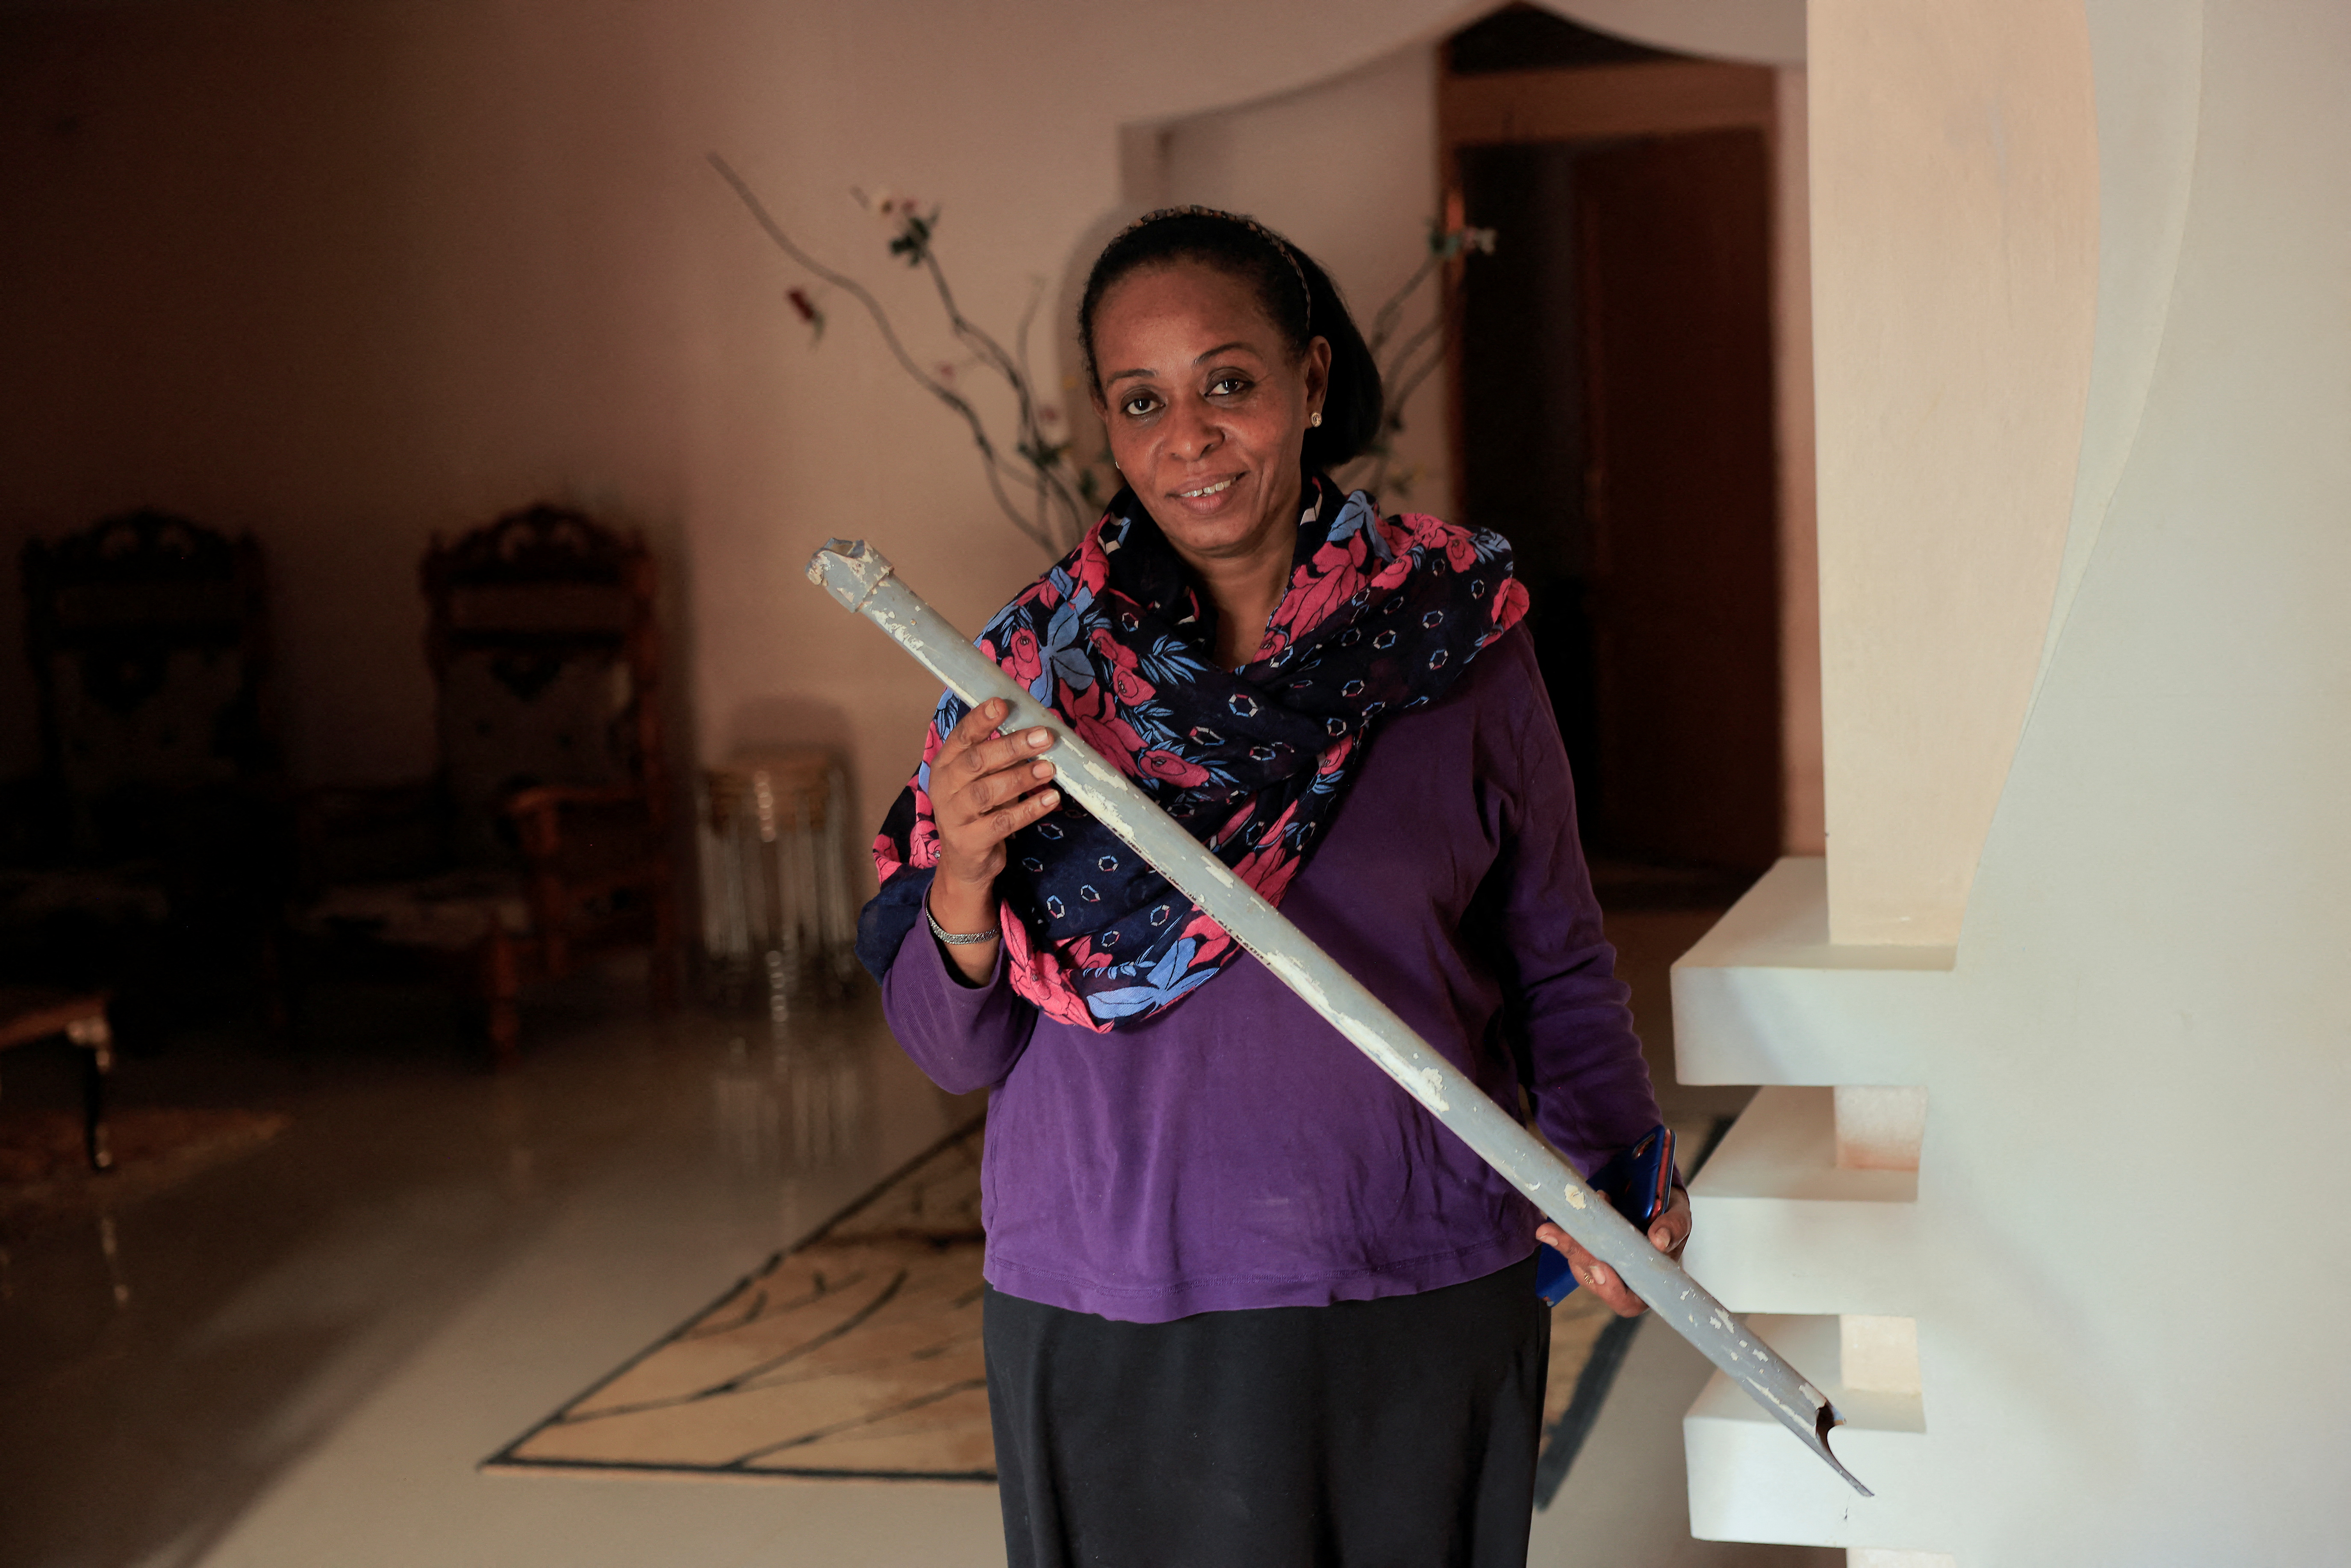 Amani sister of prominent Sudanese women's rights campaigner Amira Osman carry a stick left by security after arrest in her home in Khartoum